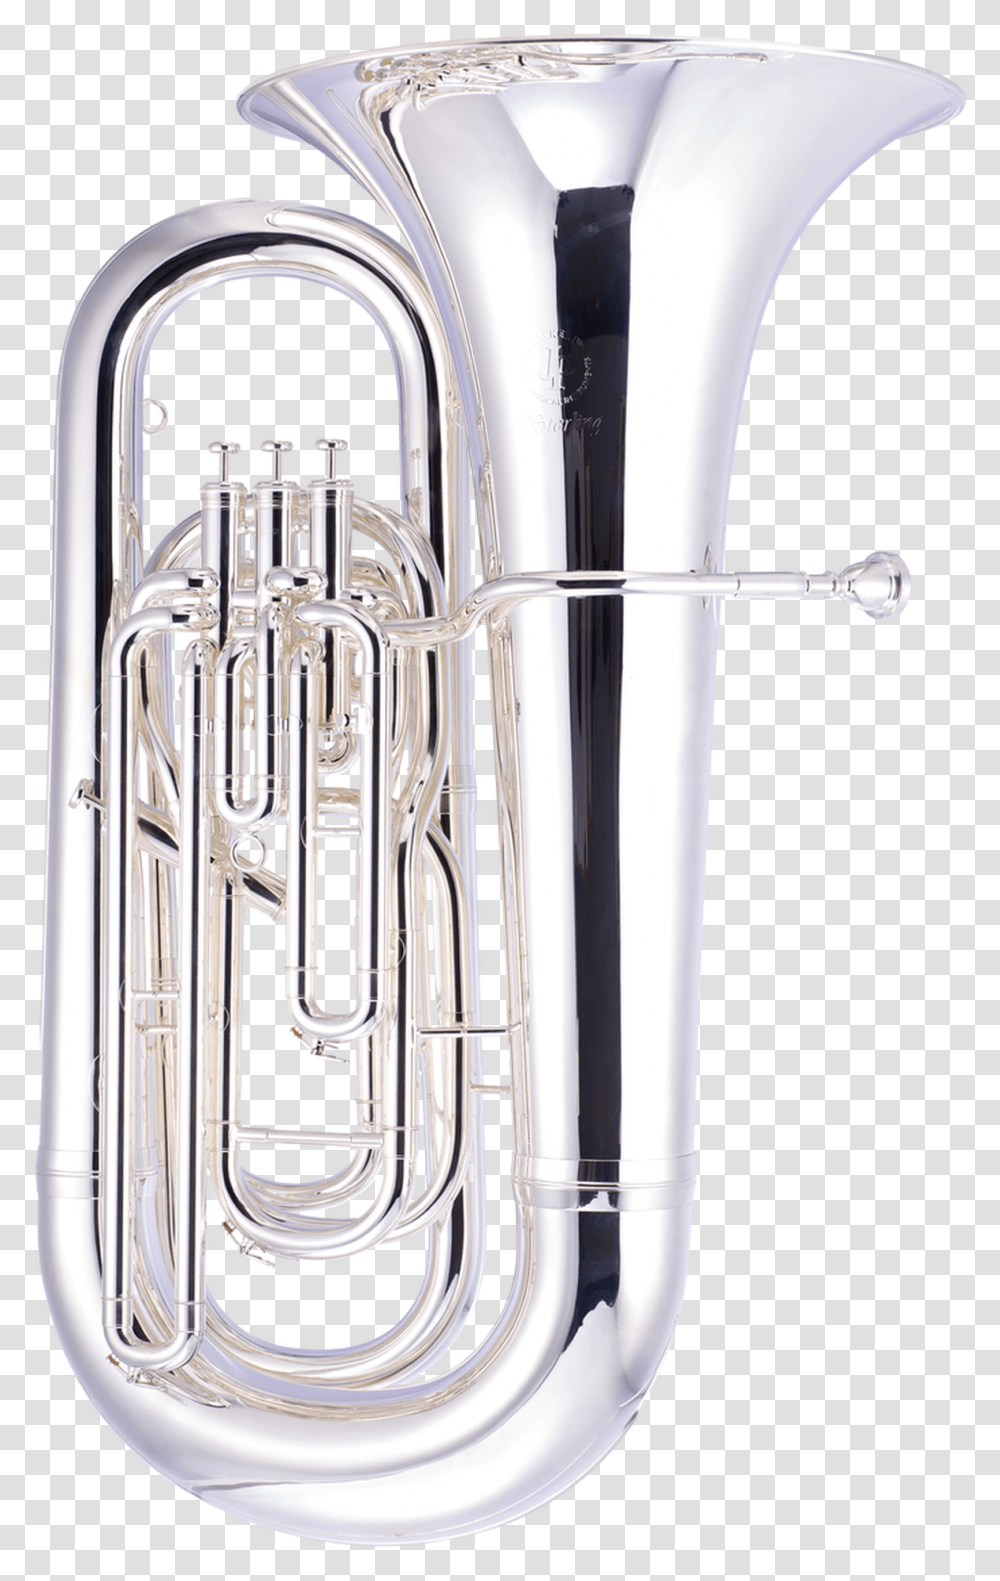 Musical Instruments Stage & Studio Professional Silver Tuba, Horn, Brass Section, Euphonium, Sink Faucet Transparent Png